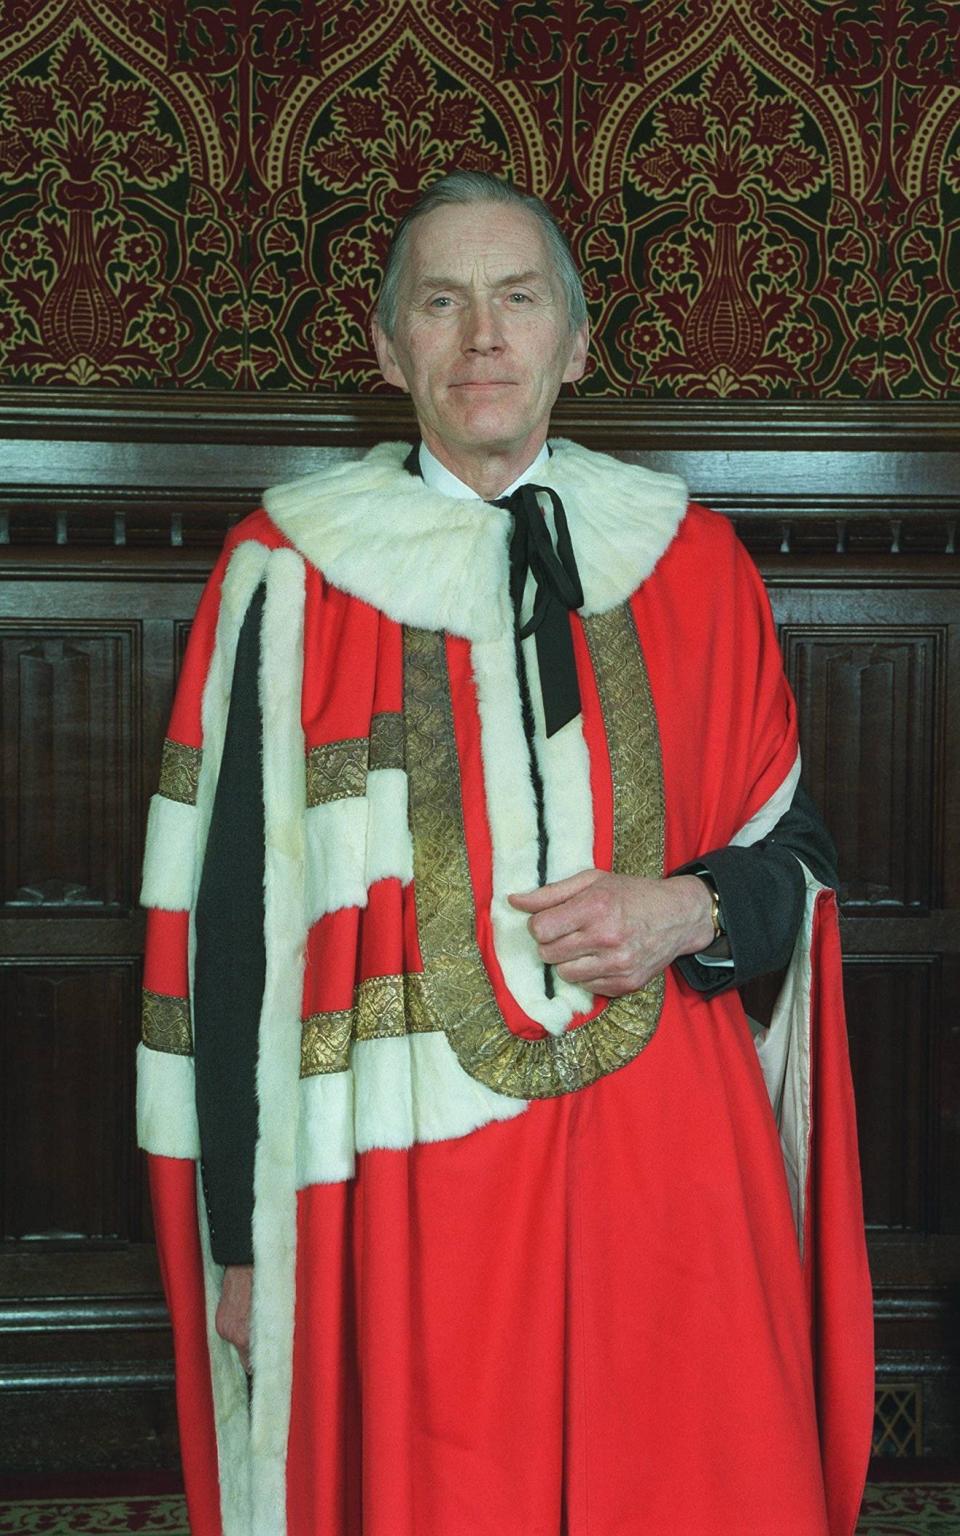 Lord Hutton after being sworn in at the House of Lords in 1997 - UPPA